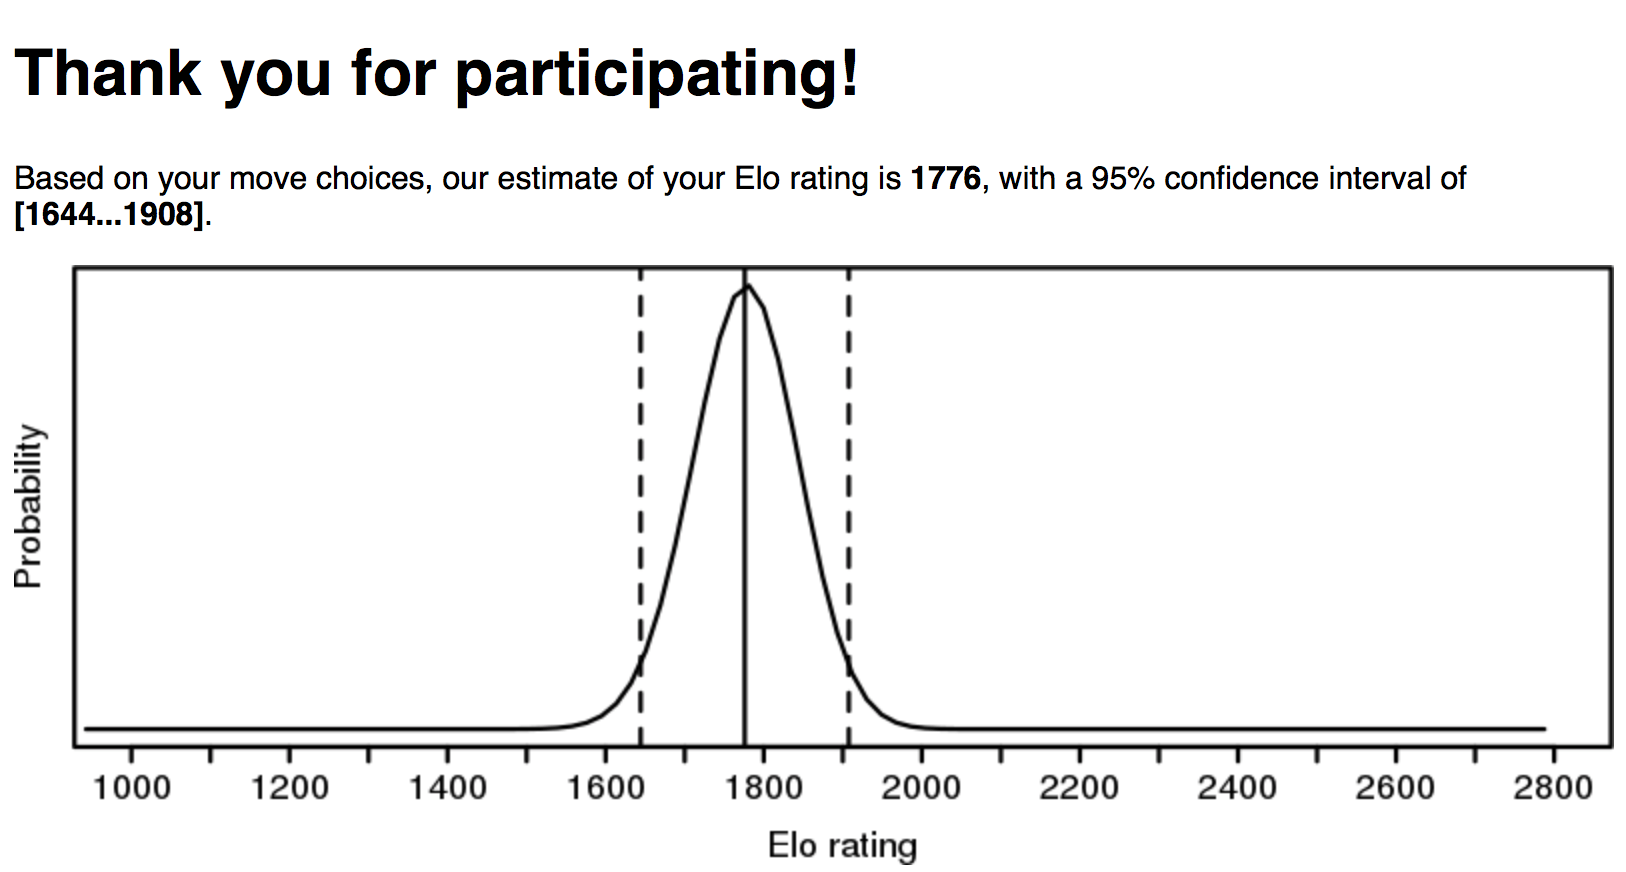 Find your REAL ELO rating: ELOMETER.NET then post here the results - Chess  Forums - Page 4 